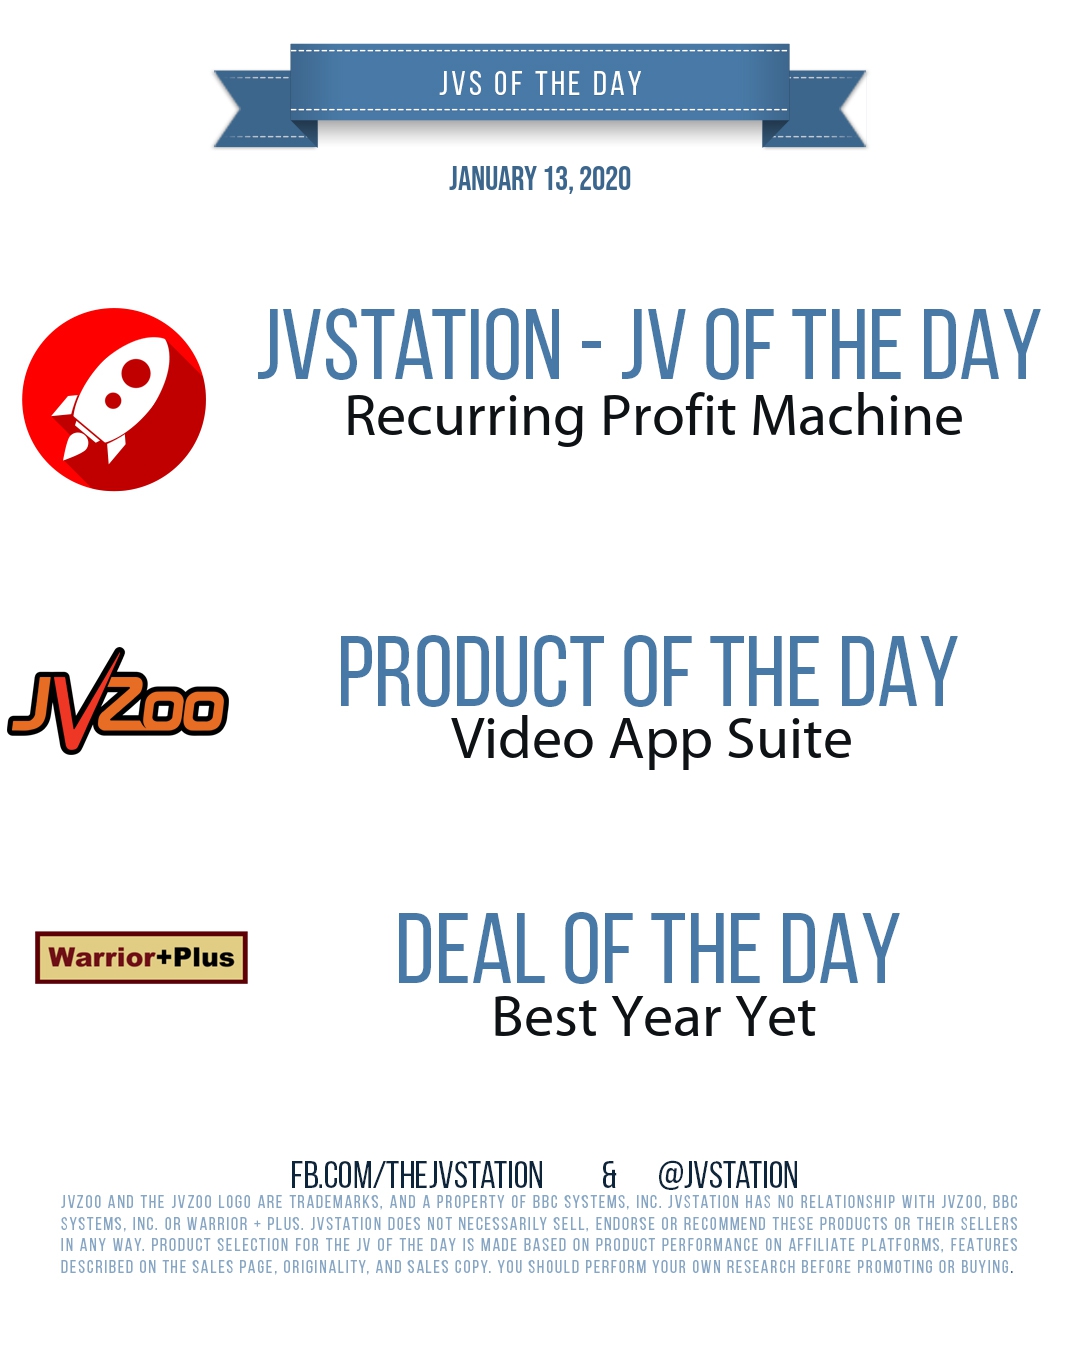 JVs of the day - January 13, 2020